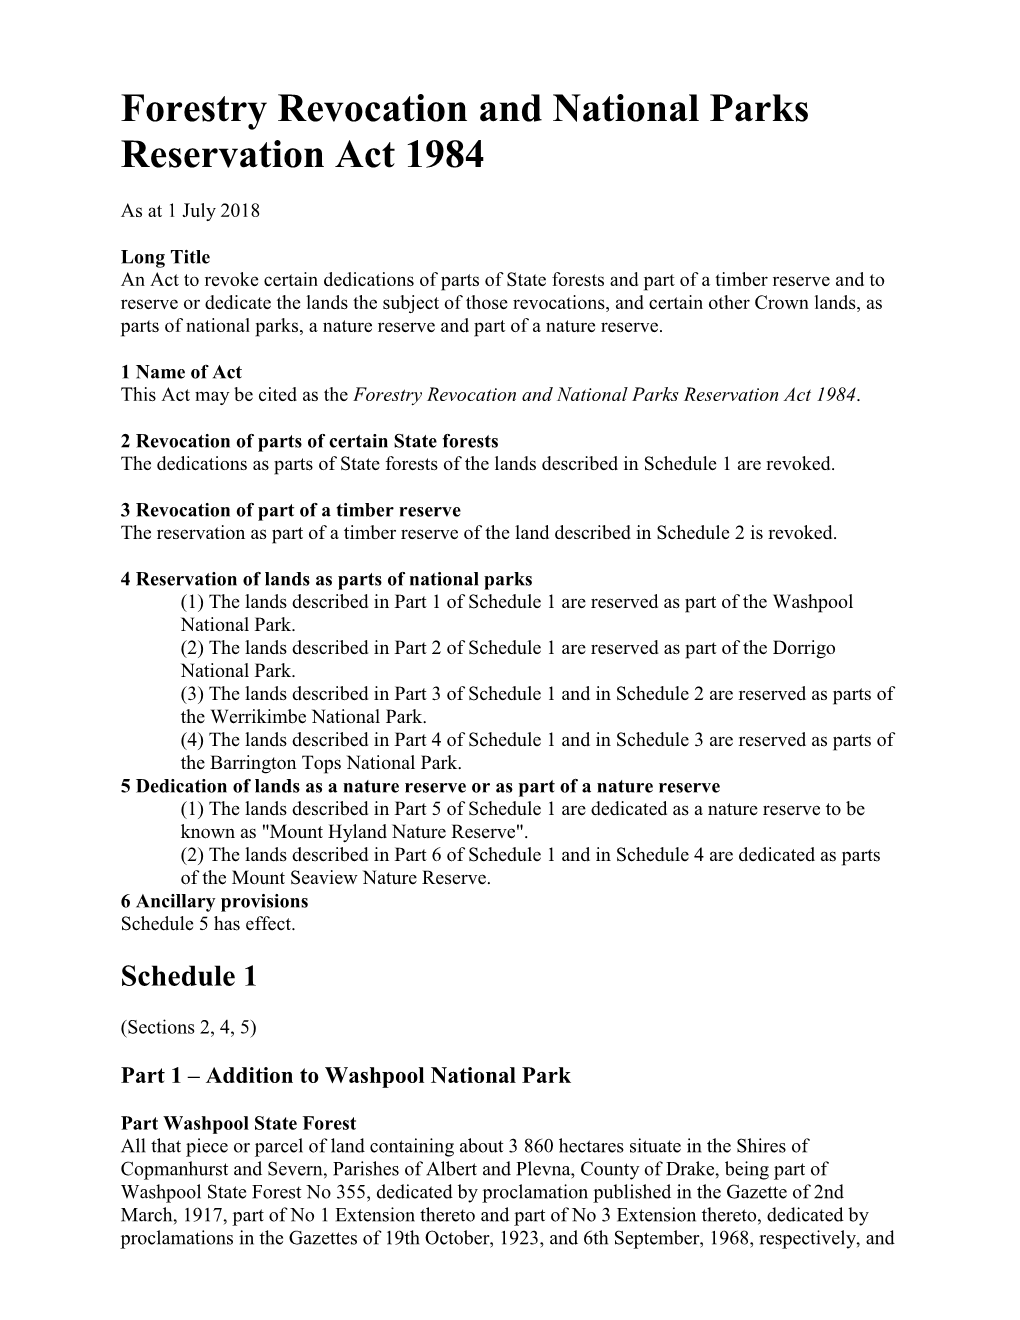 Forestry Revocation and National Parks Reservation Act 1984